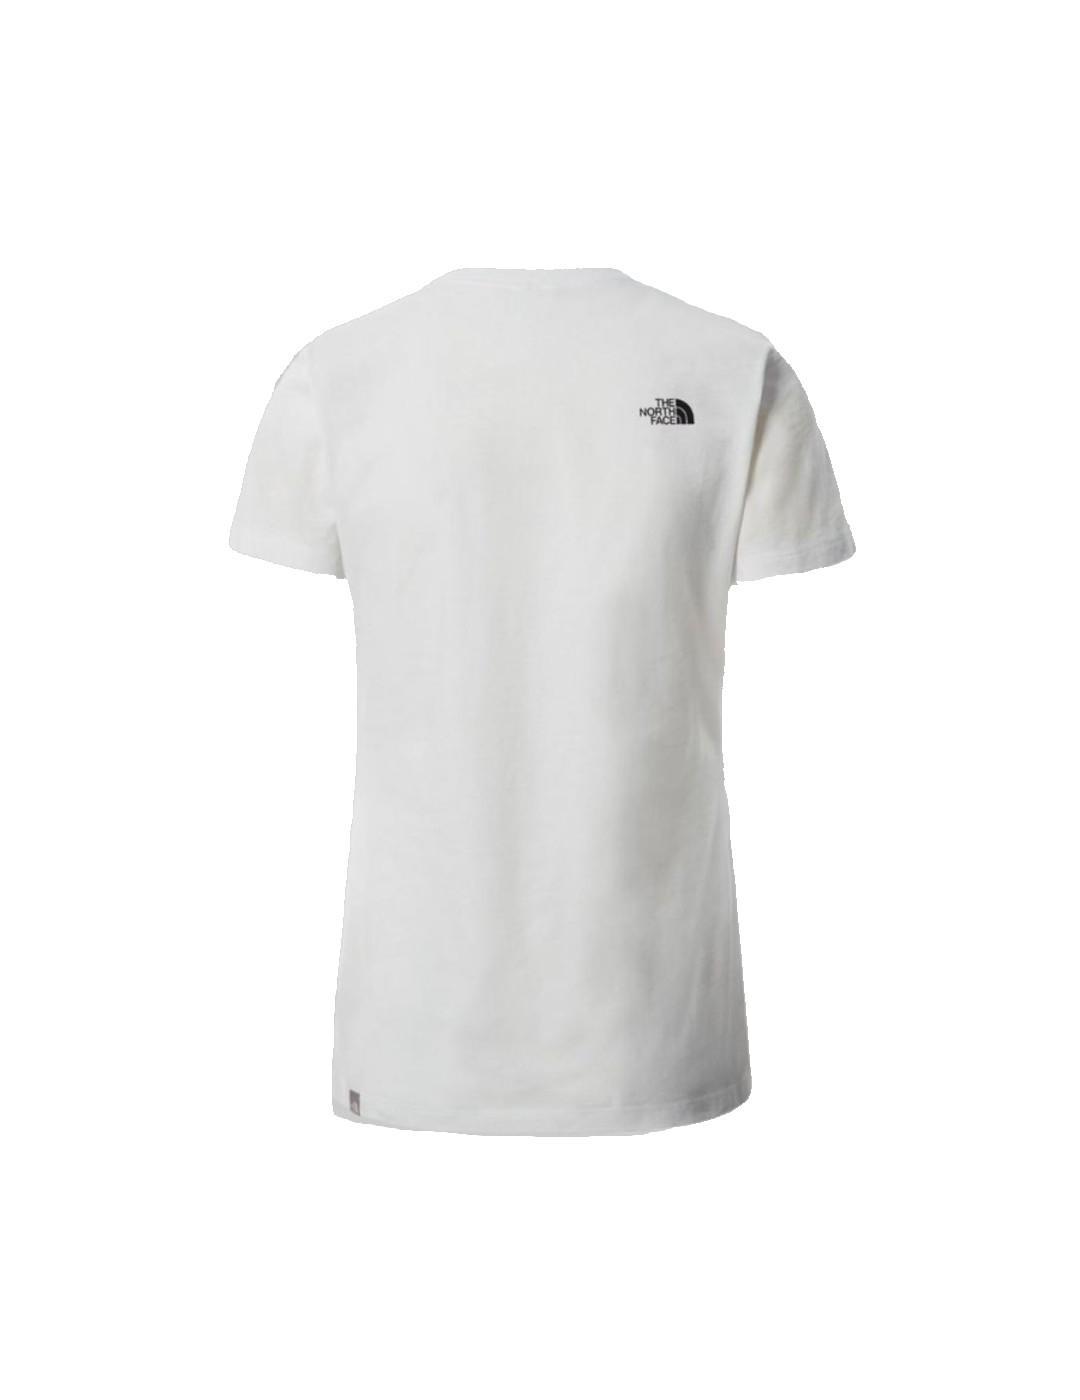 Camiseta Mujer The North Face Easy Blanca